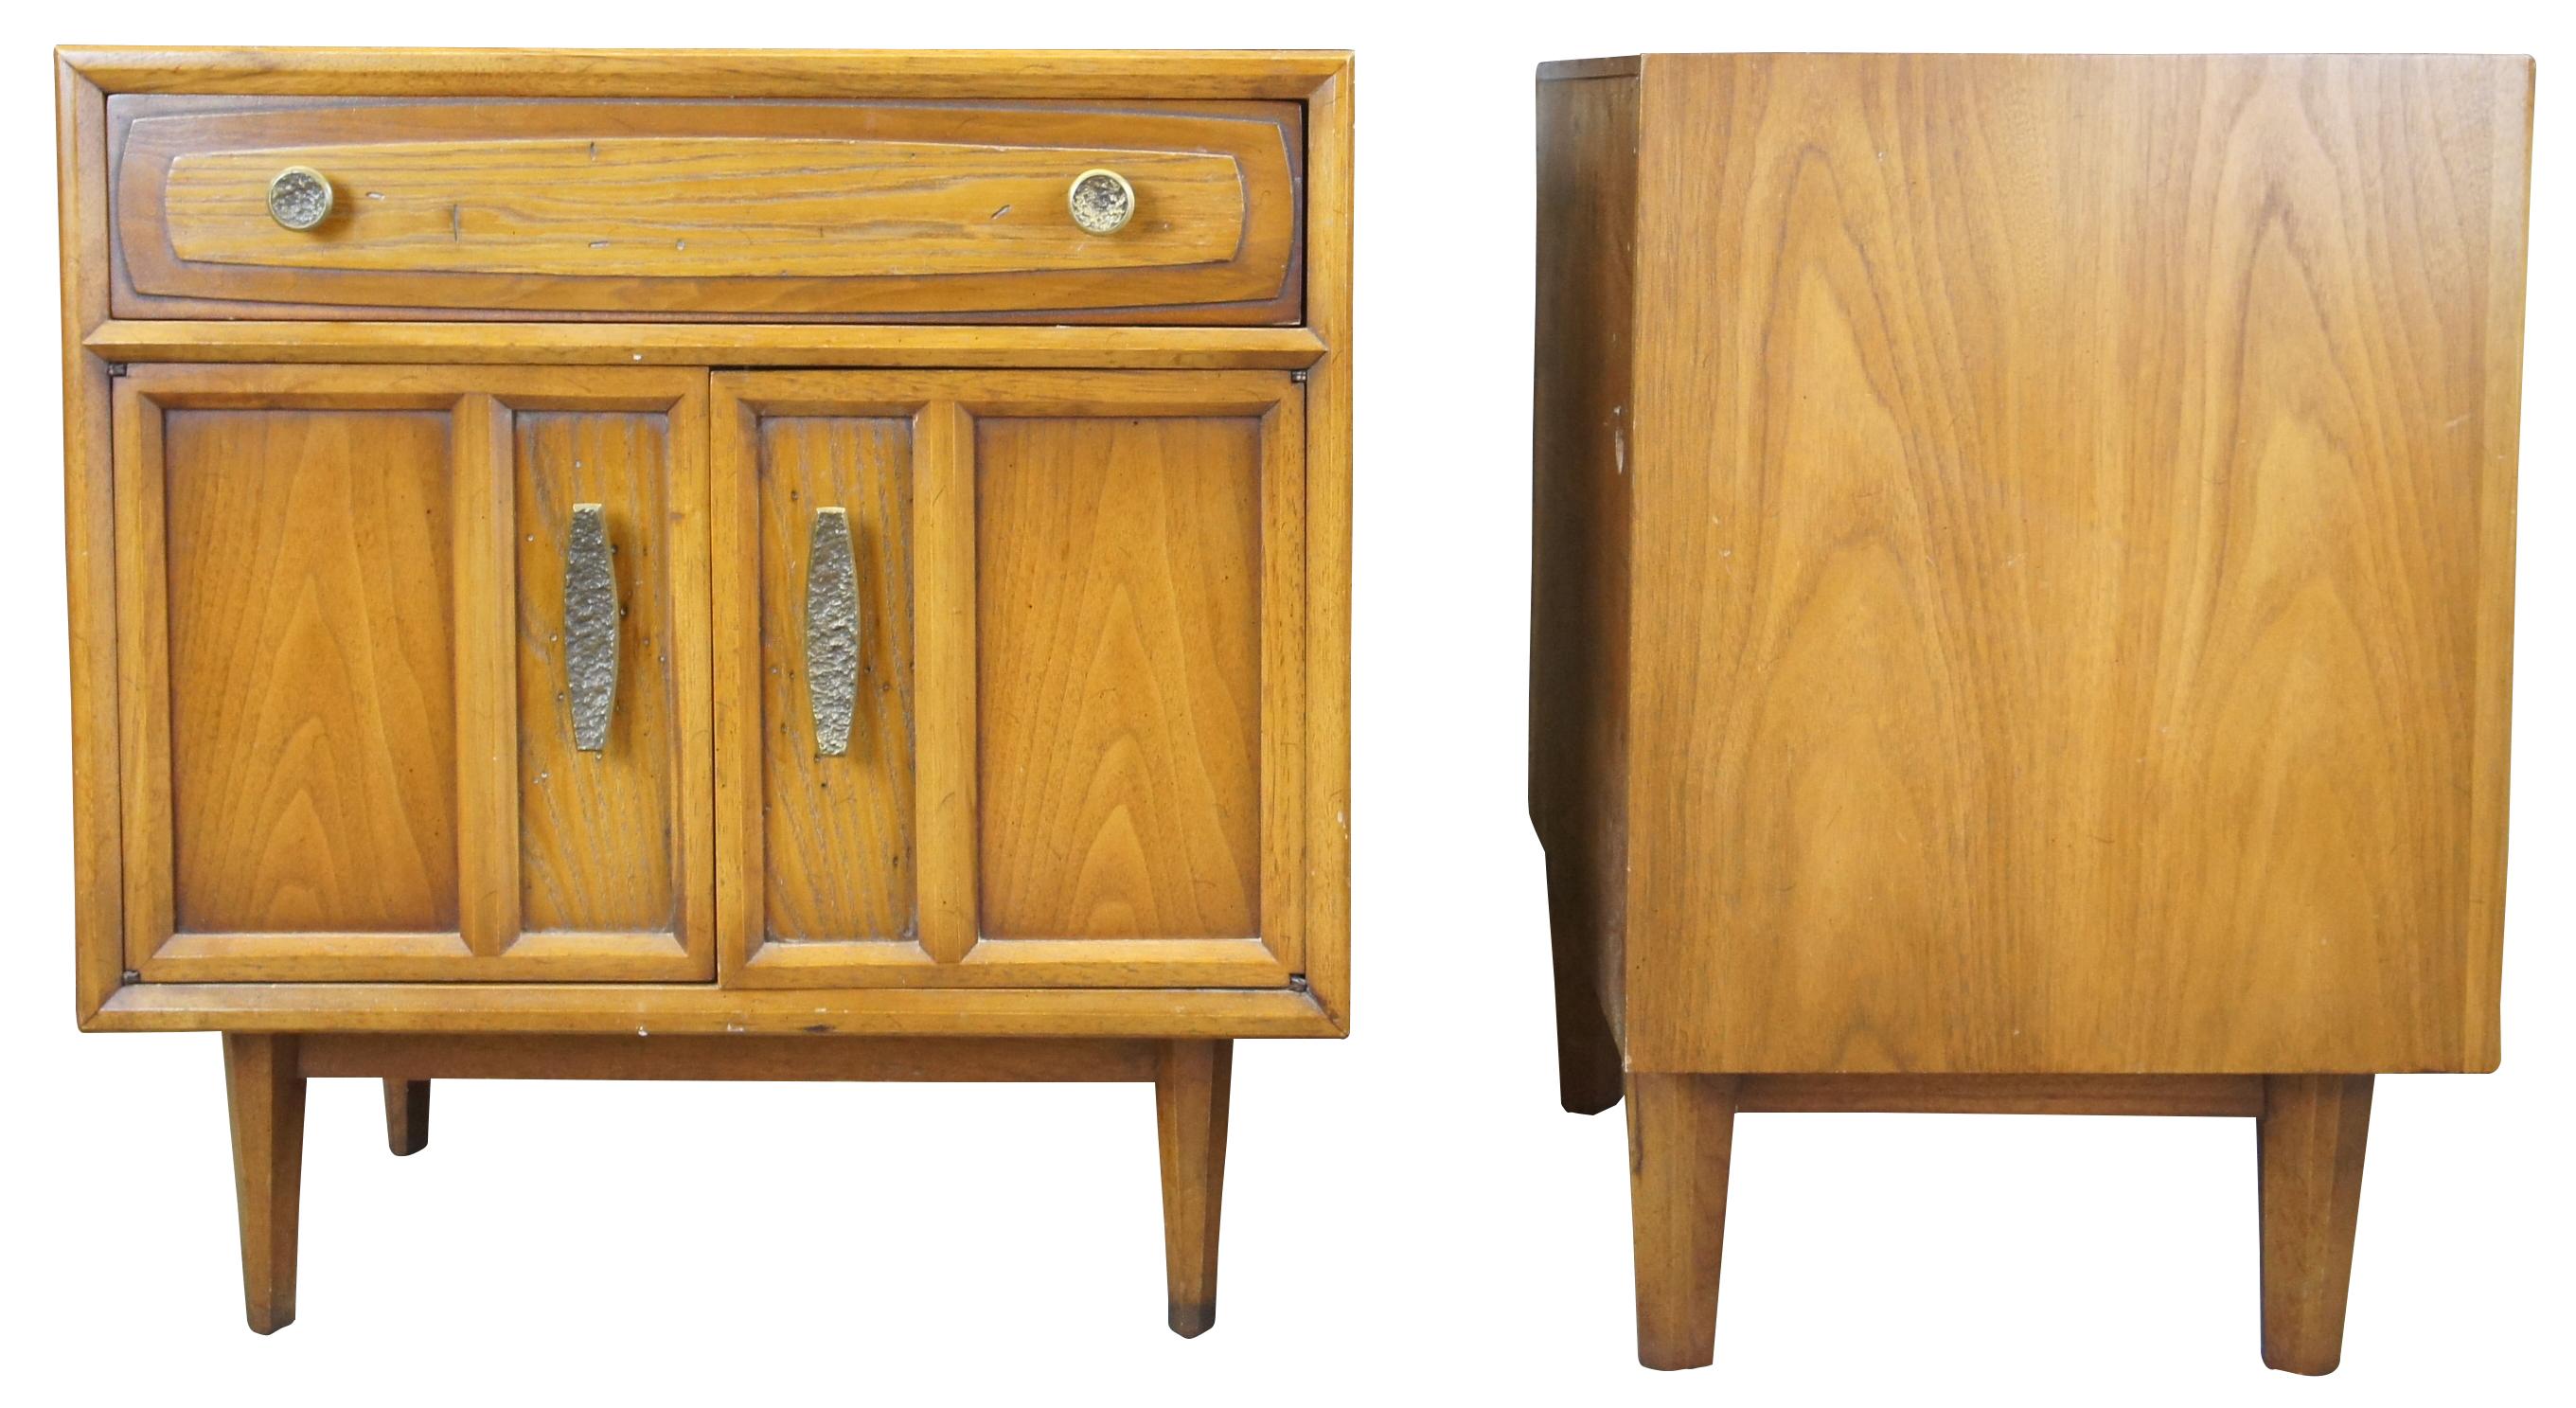 2 Mid-Century Modern Drexel Heritage side tables. Made of walnut and oak featuring an upper drawers and lower cabinet for storage 16-171-38.
 